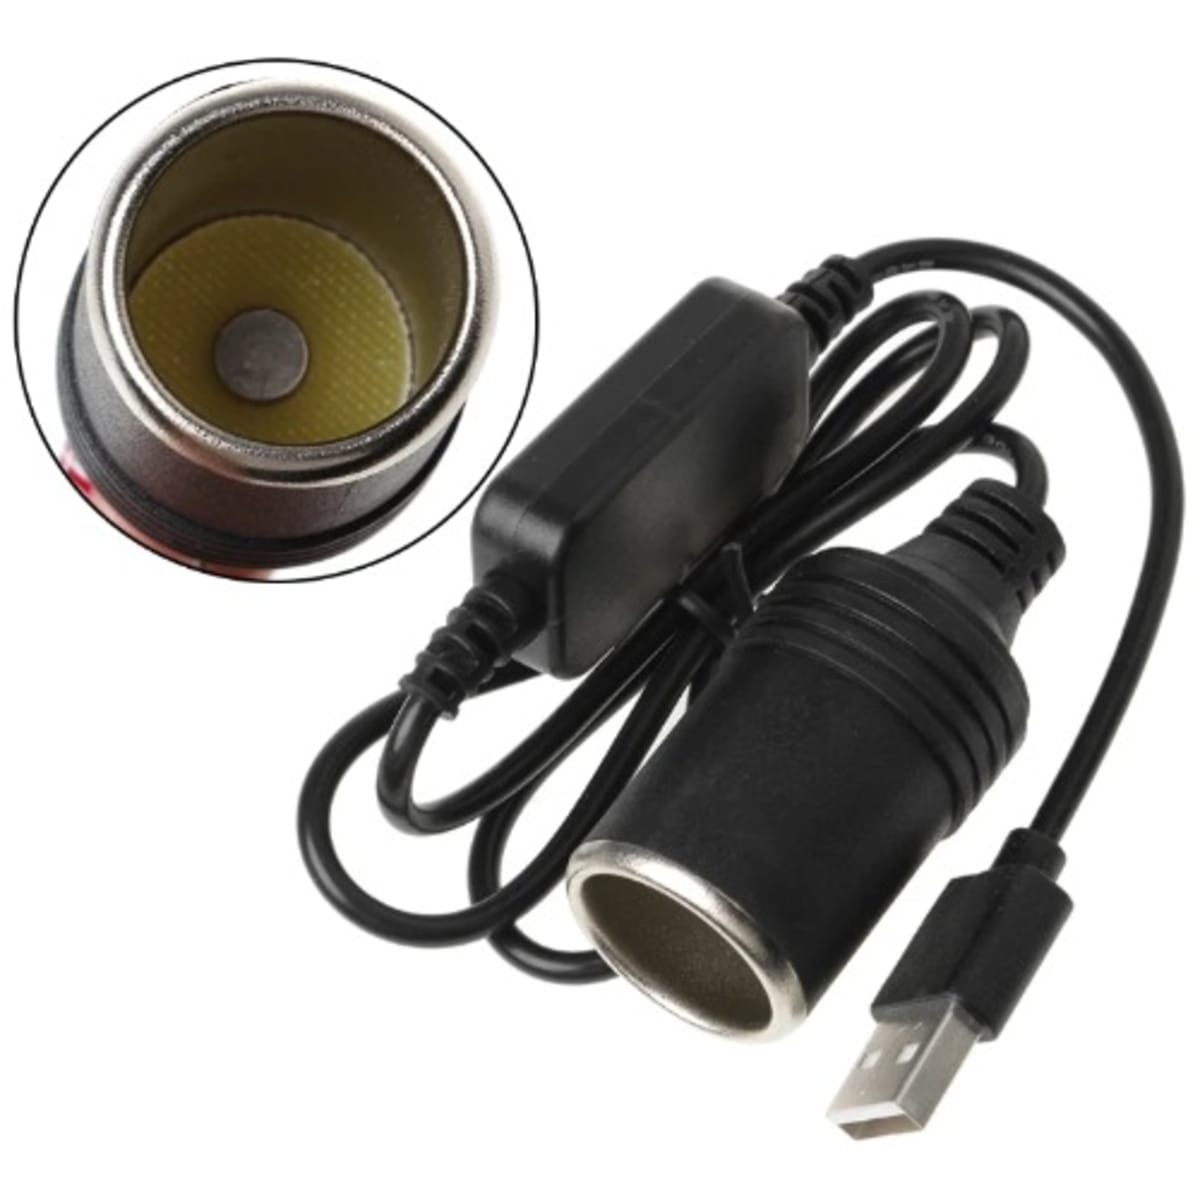 Usb 5v To 12v Car Socket Female Power Converter Adapter Cable With